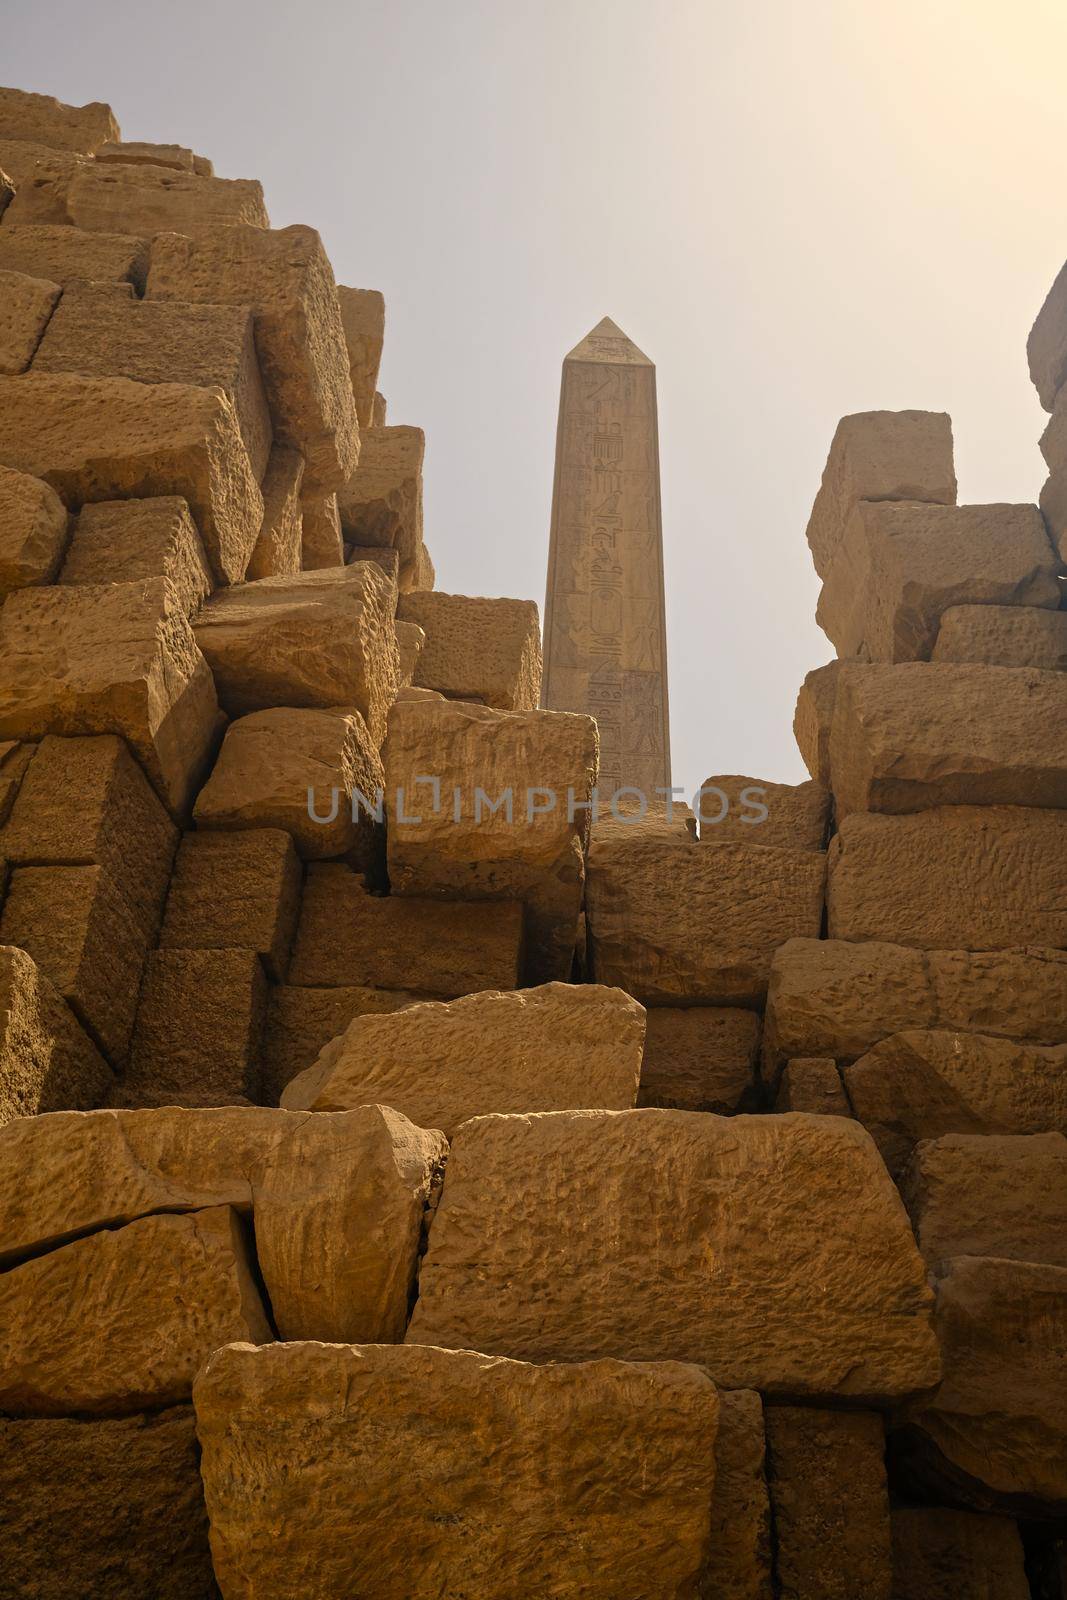 temple of Luxor - historical egypt monument archeology. High quality photo